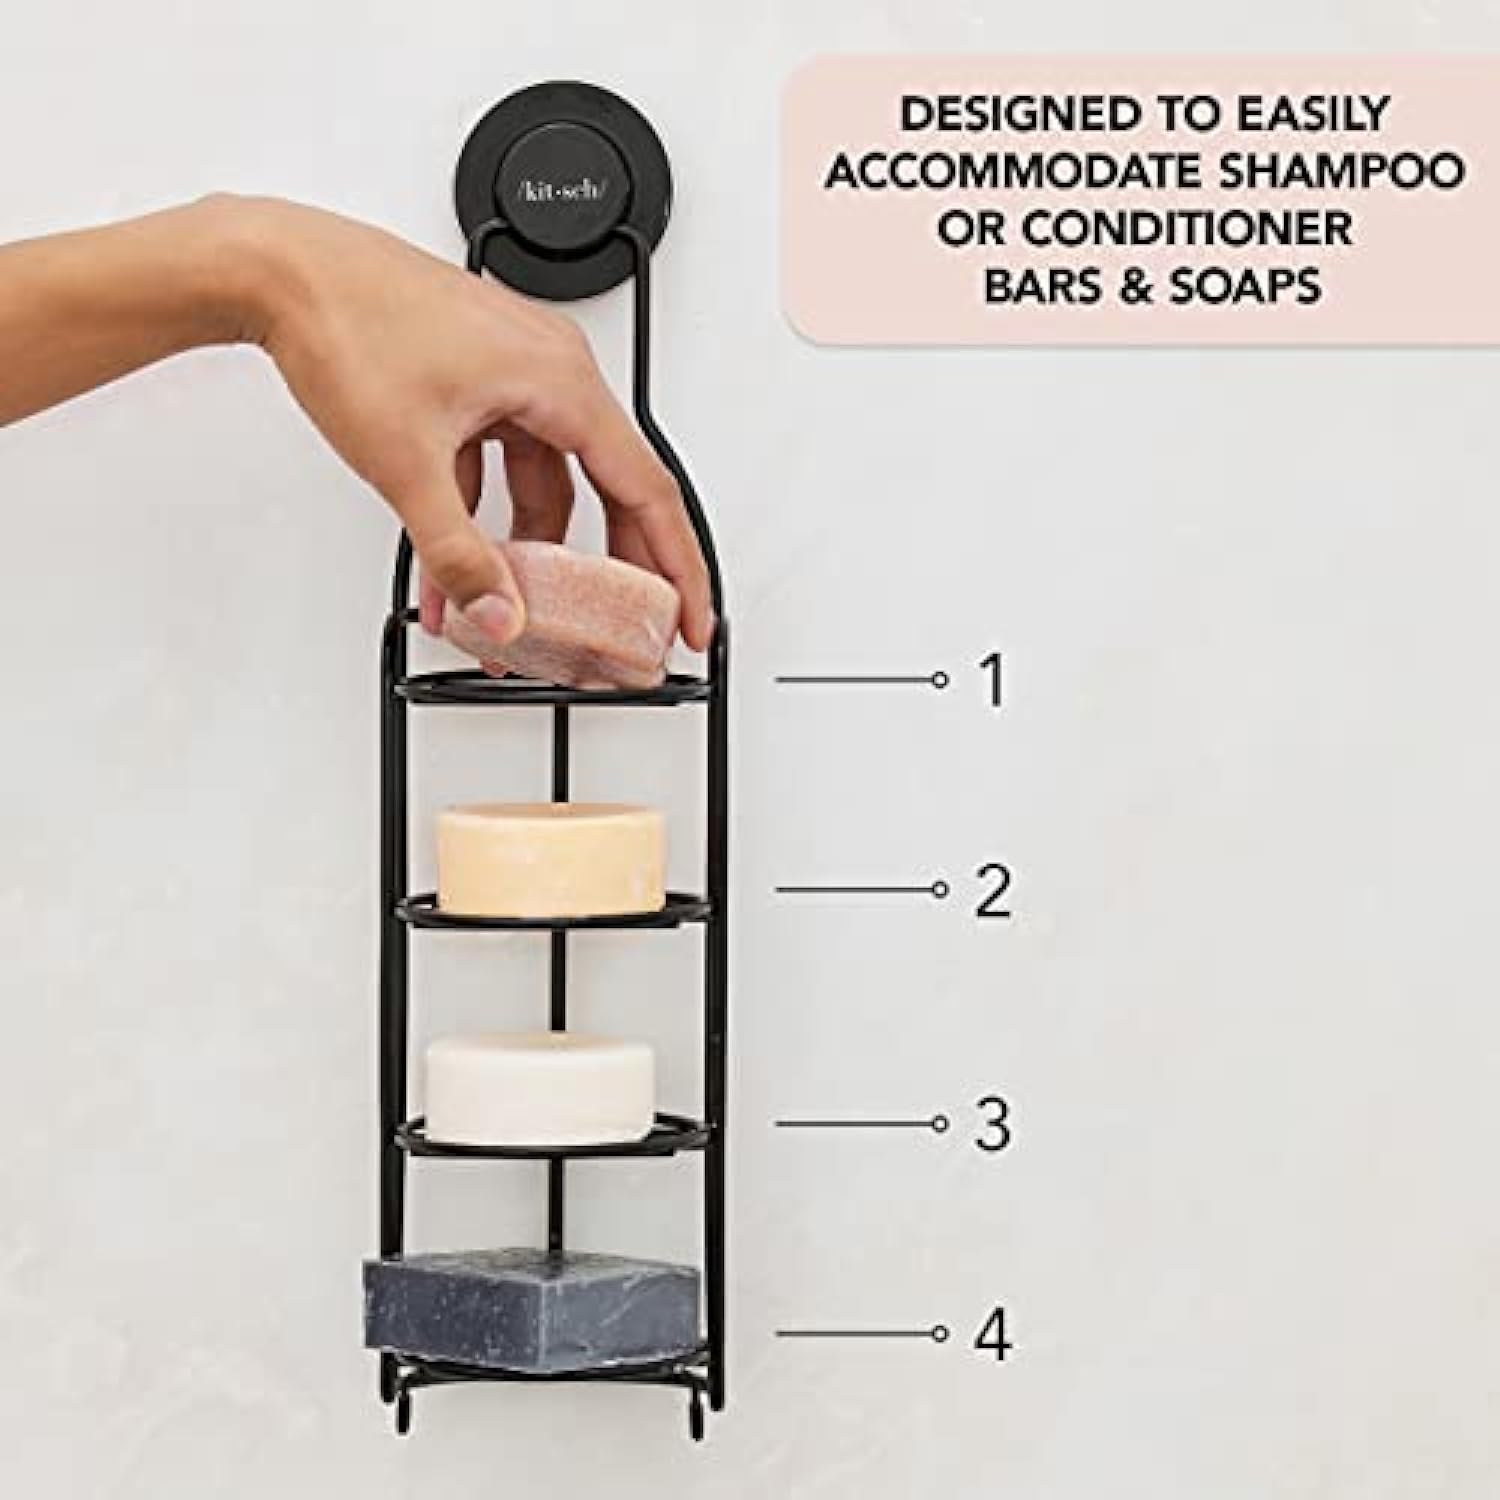 Soap Bar Holder for Shower, 3 Tiers Soap Holder for Bathroom Wall,  Stainless Steel Shampoo Bar Holder with 2 Hooks for Organize Conditioner  Bar